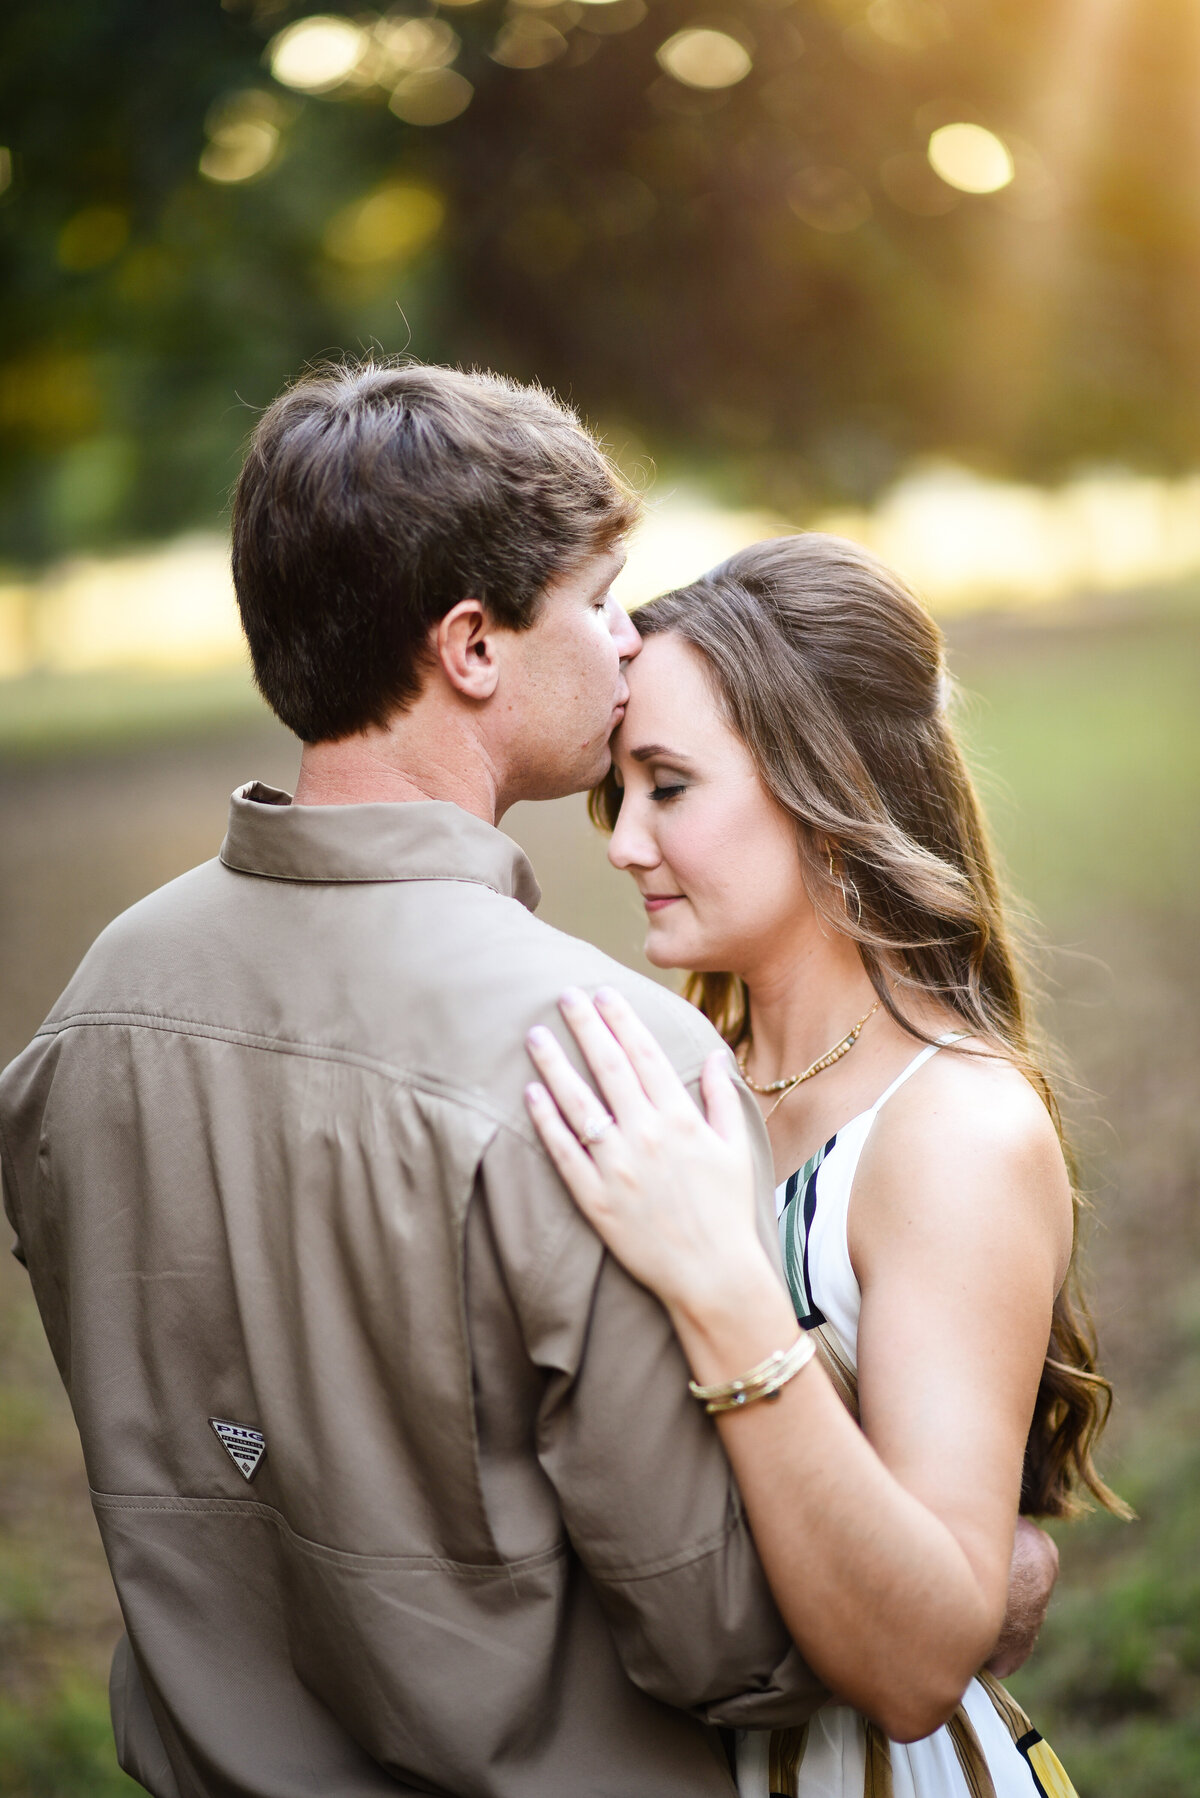 Beautiful Mississippi Engagement Photography: man kisses woman during golden hour sunset in Mississippi Delta Pecan Orchard